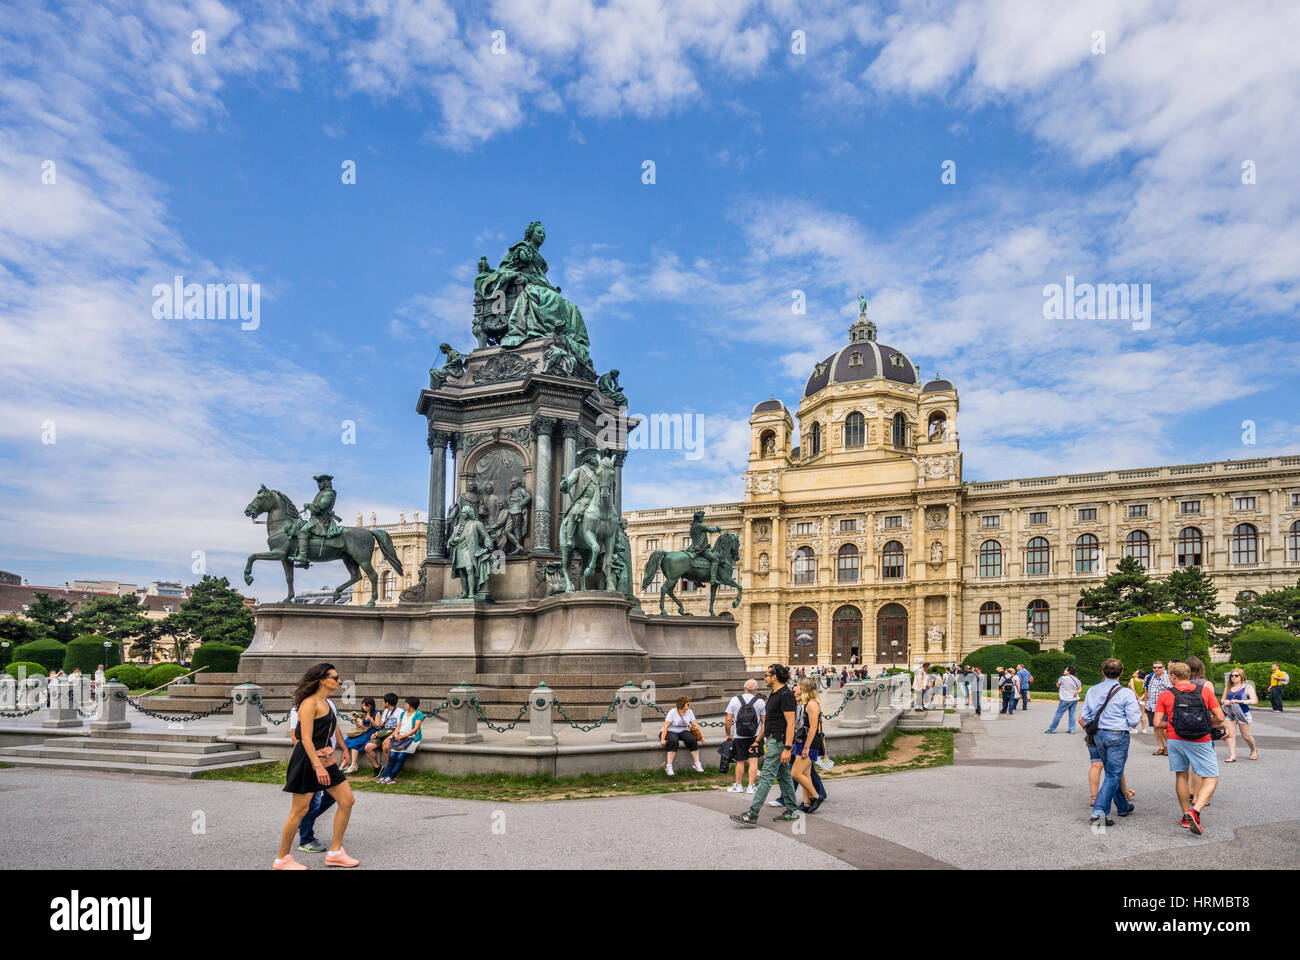 Austria, Vienna, Maria-Theresien-Platz, Museum of Natural History Vienna and the statue of Empress Maria Theresa Stock Photo